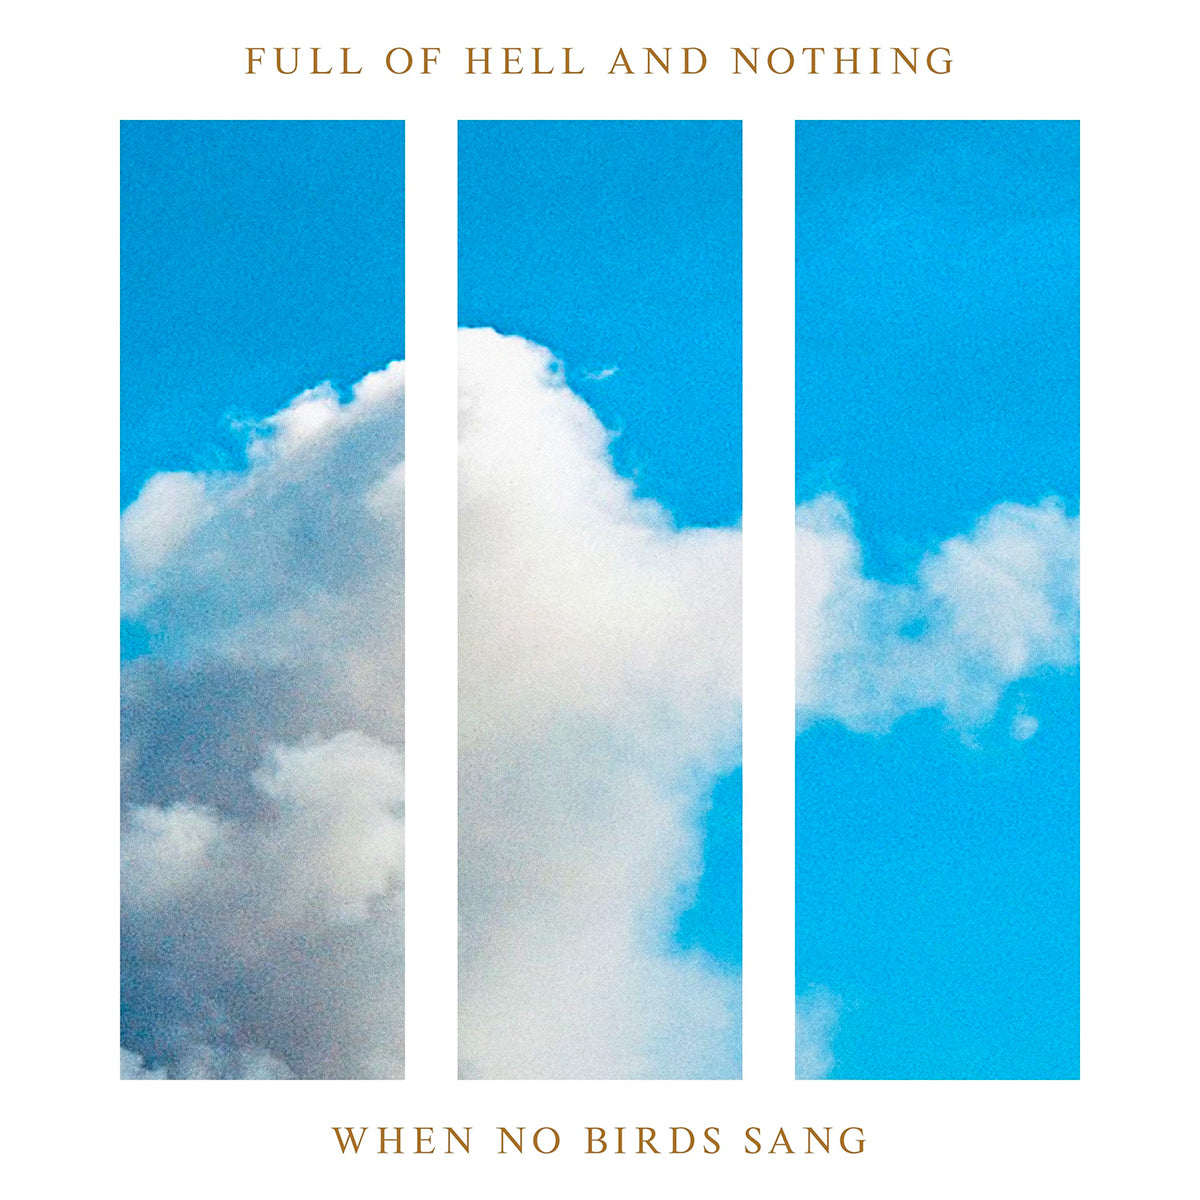 FULL OF HELL & NOTHING "When No Birds Sang" LP